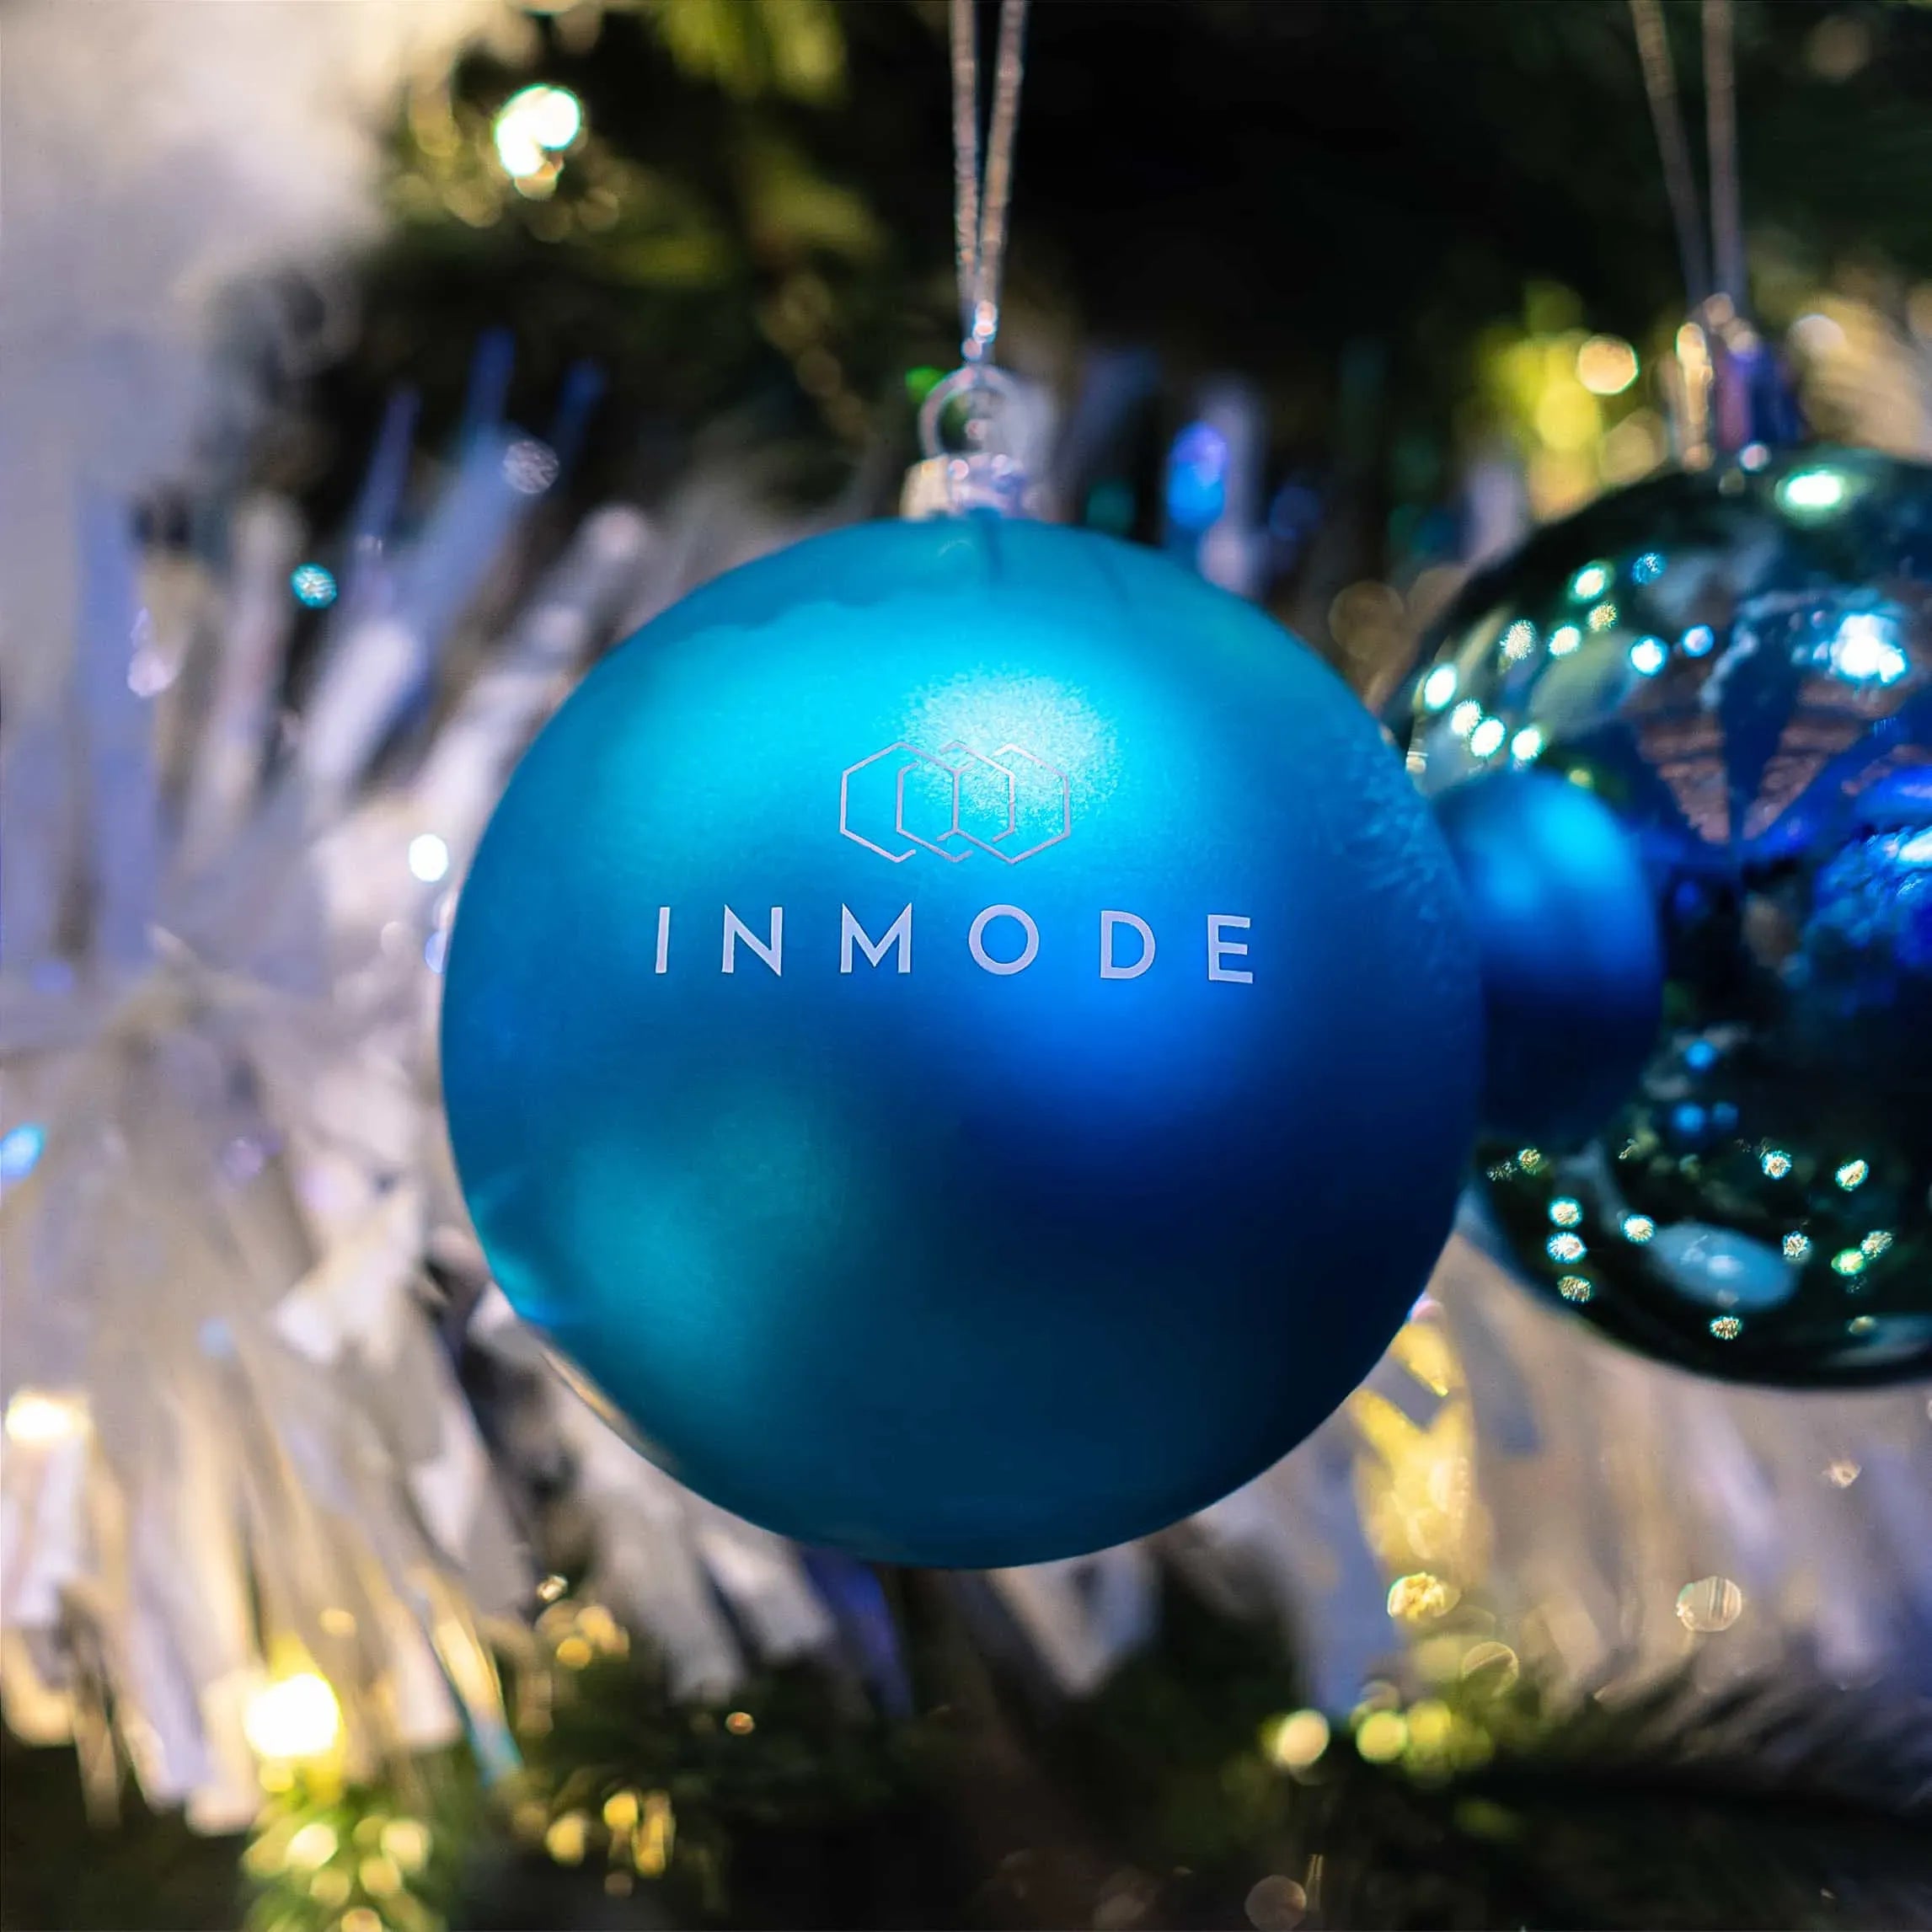 A close-up of a matte blue Christmas bauble hanging on a tree, with the white 'INMODE' logo on it, set against a backdrop of festive lights and white Christmas tree branches.